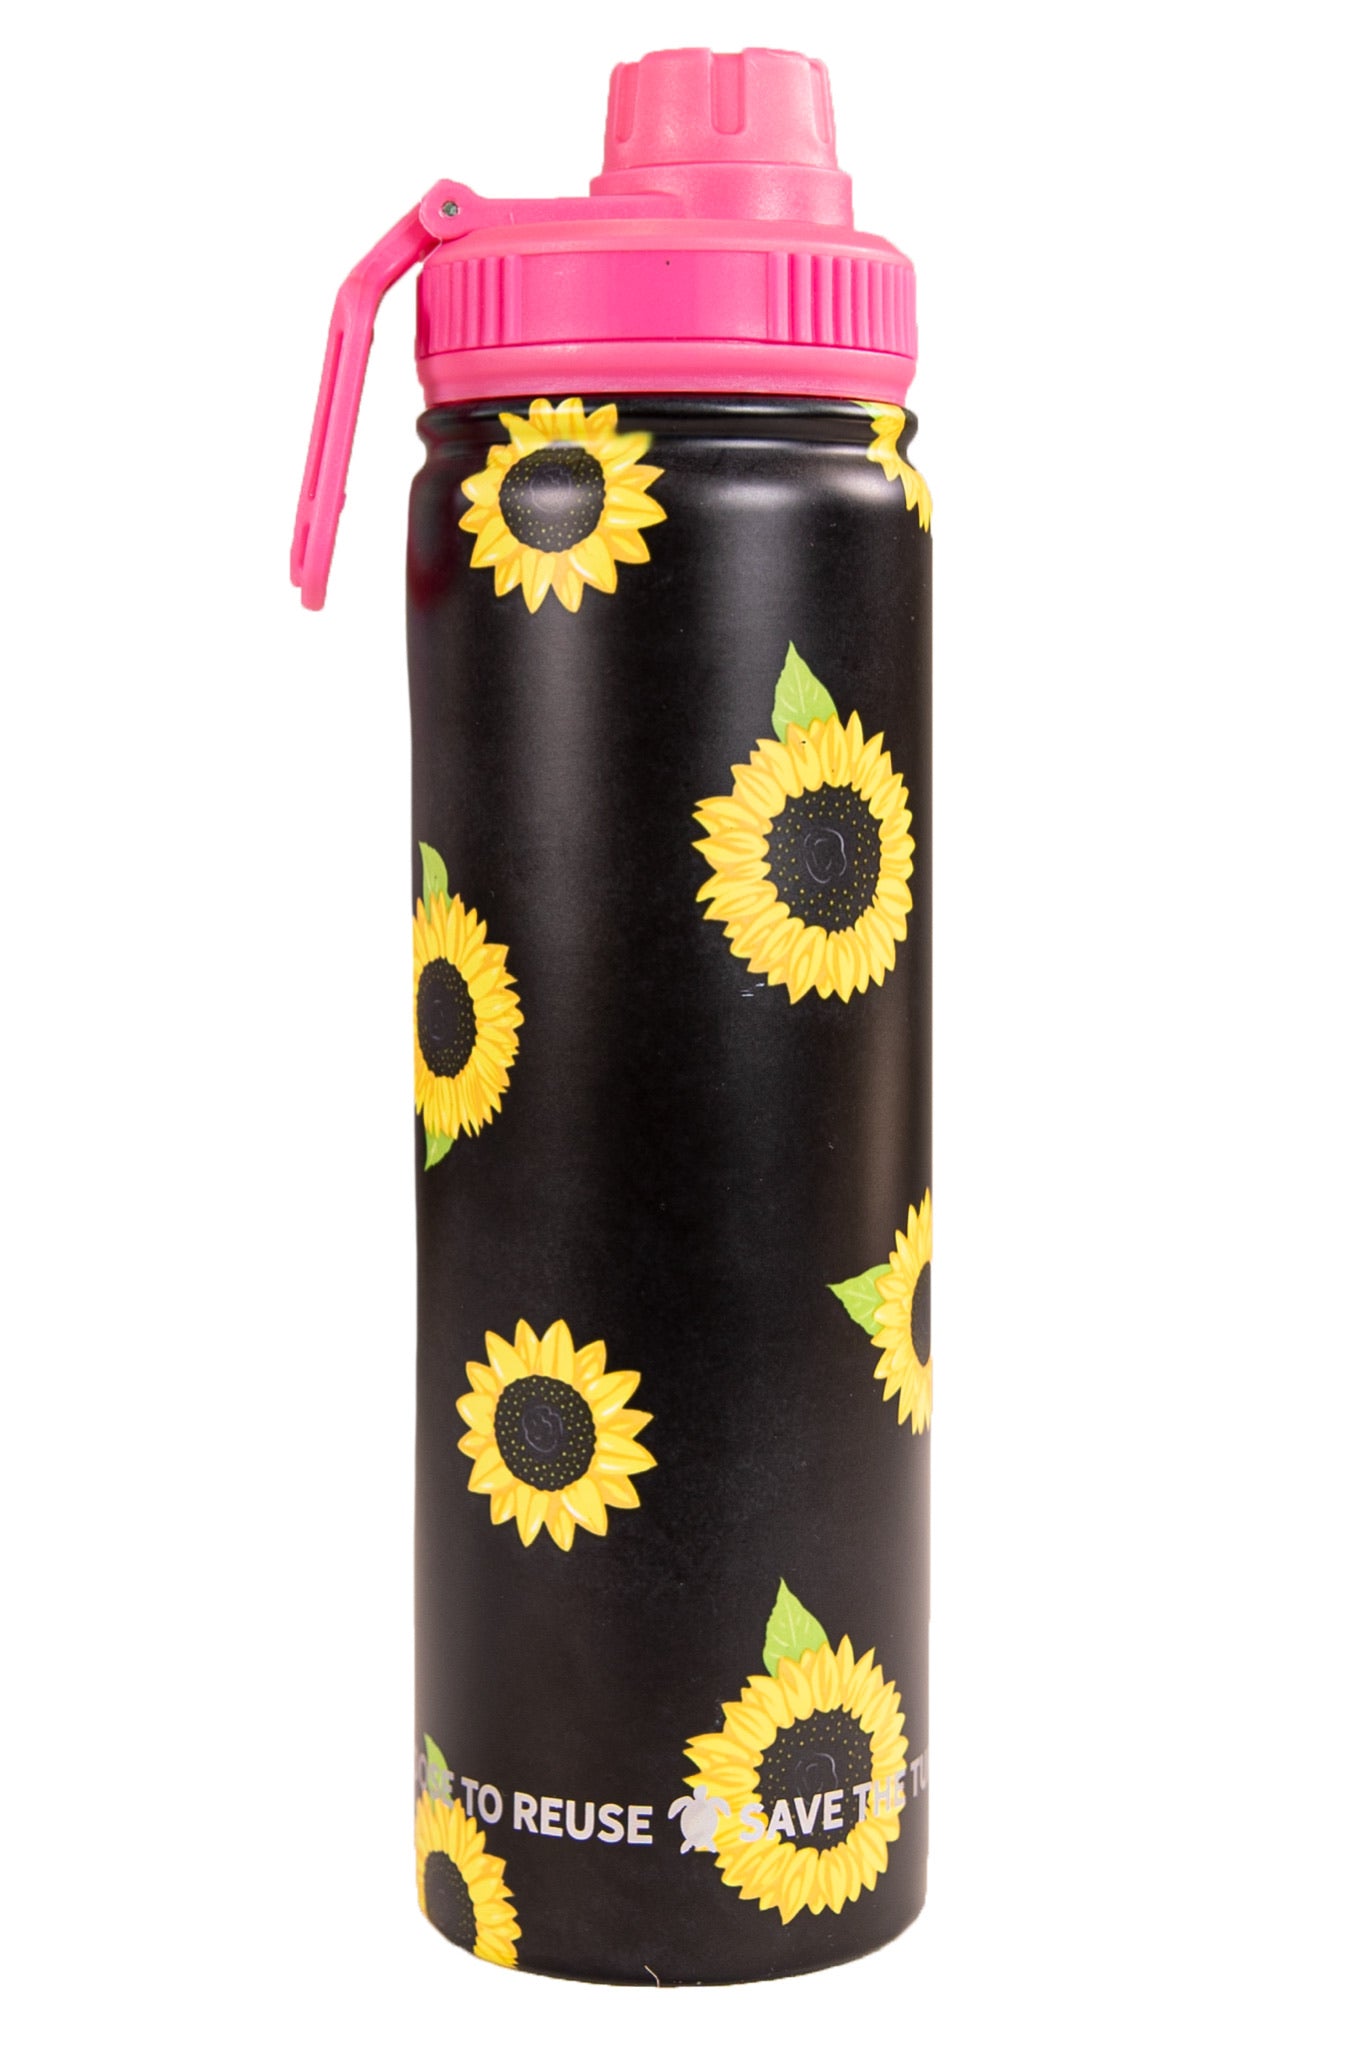 Simply Southern "Sunflower" Drinkware